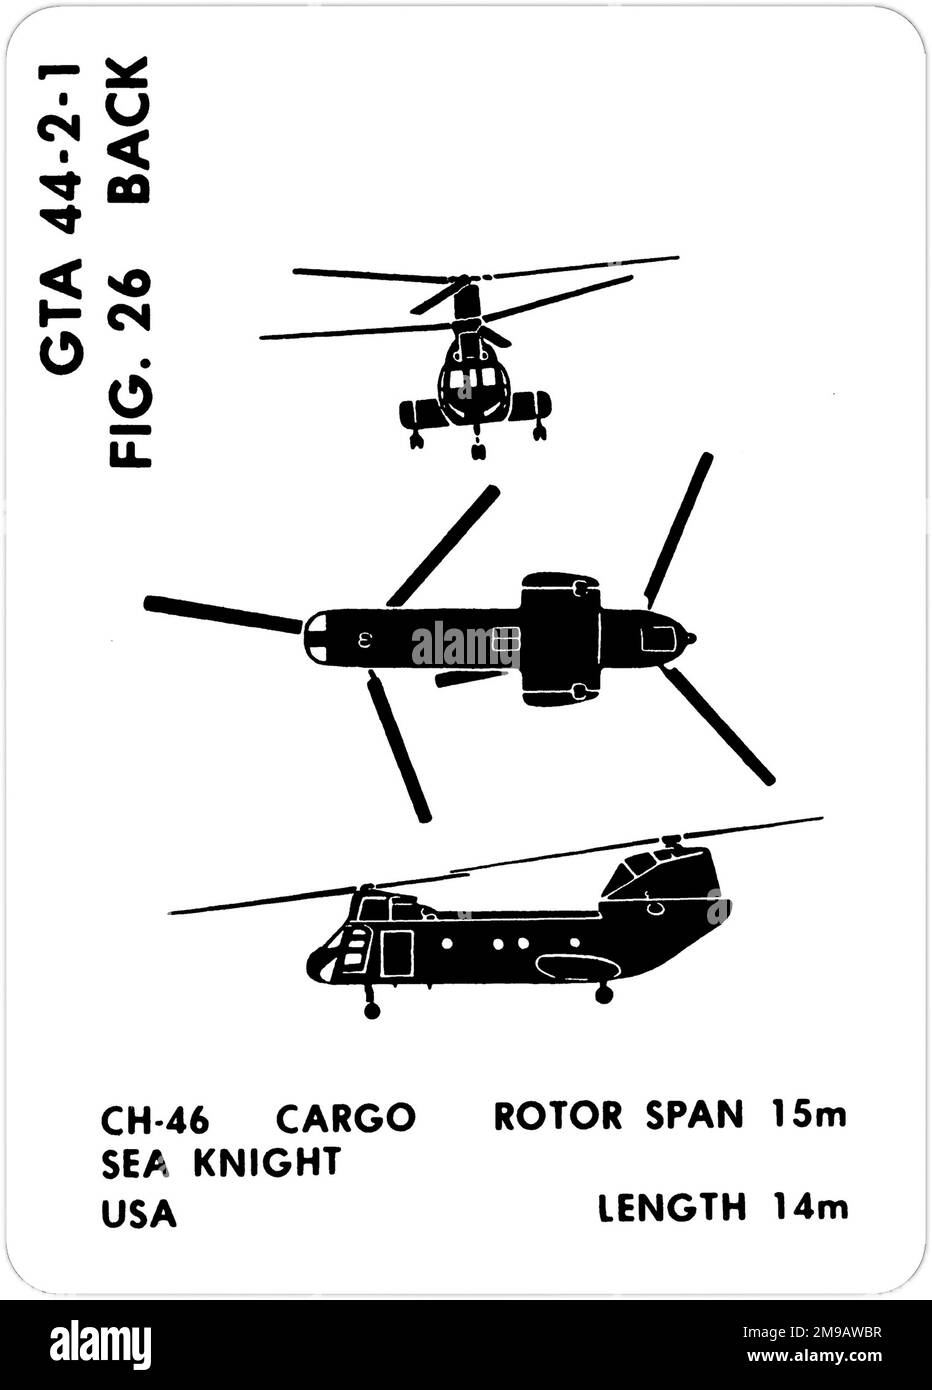 Boeing-Vertol CH-46 Sea Knight. This is one of the series of Graphics Training Aids (GTA) used by the United States Army to train their personnel to recognize friendly and hostile aircraft. This particular set, GTA 44-2-1, was issued in July1977. The set features aircraft from: Canada, Italy, United Kingdom, United States, and the USSR. Stock Photo